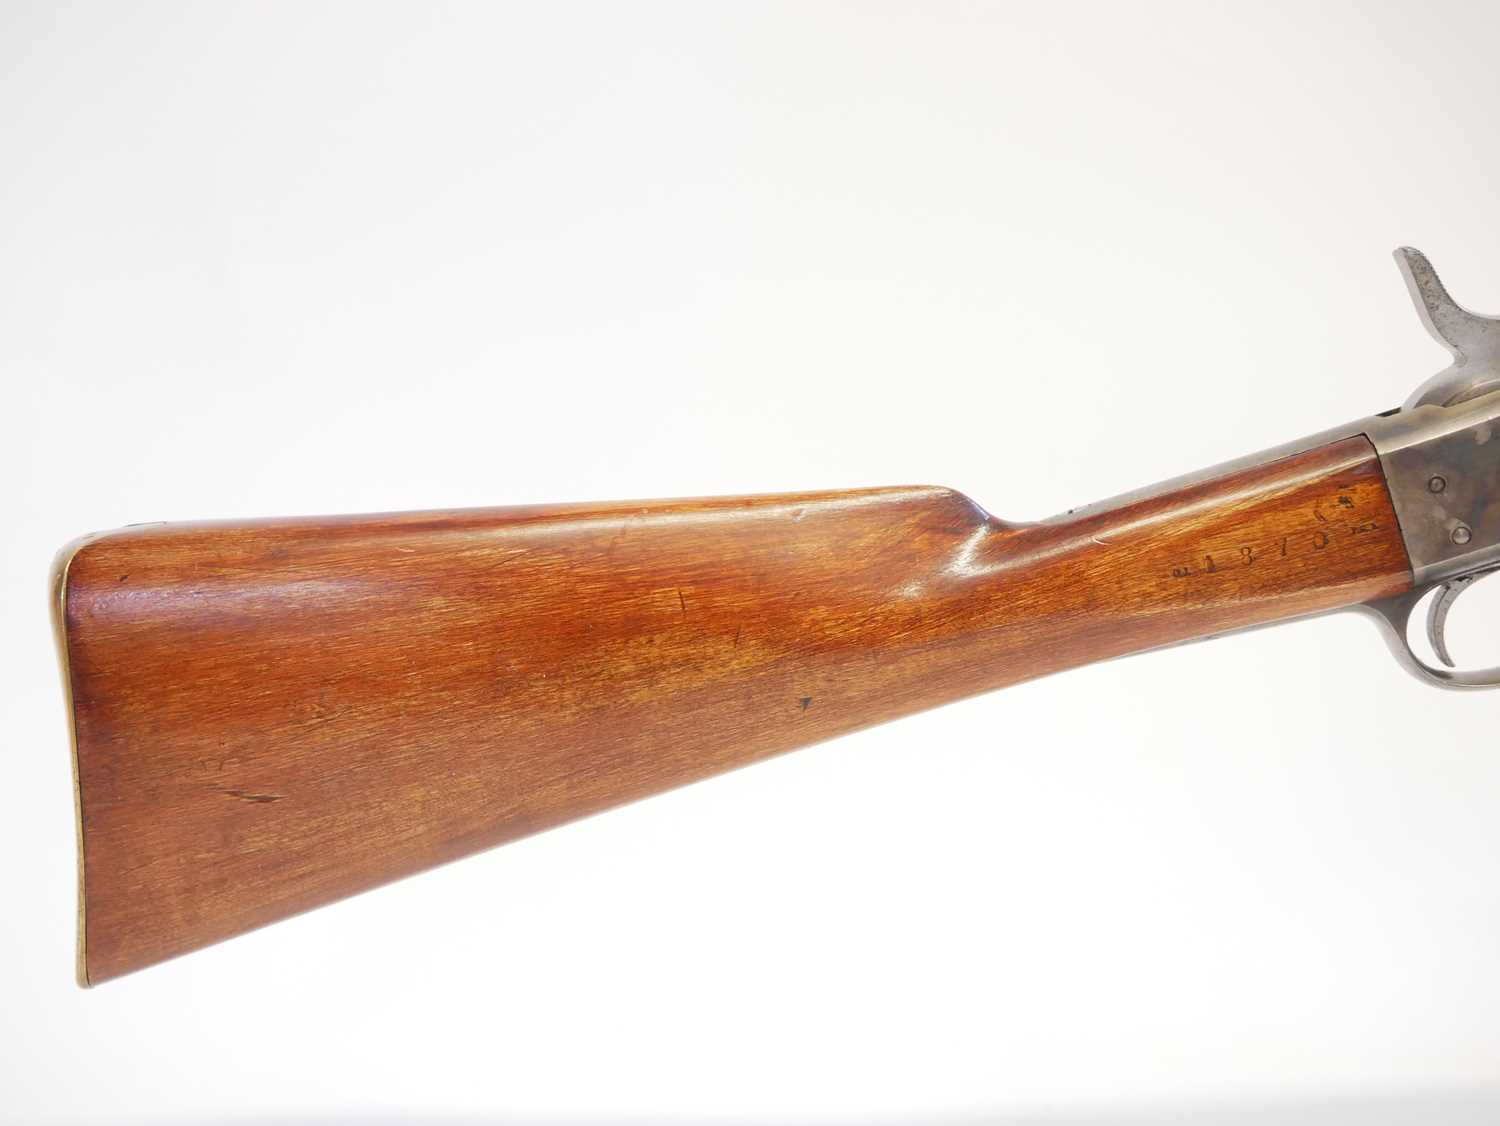 Swedish Remington 12.11x44R M1867 rolling block rifle, serial number 2401, 36inch barrel secured - Image 3 of 13